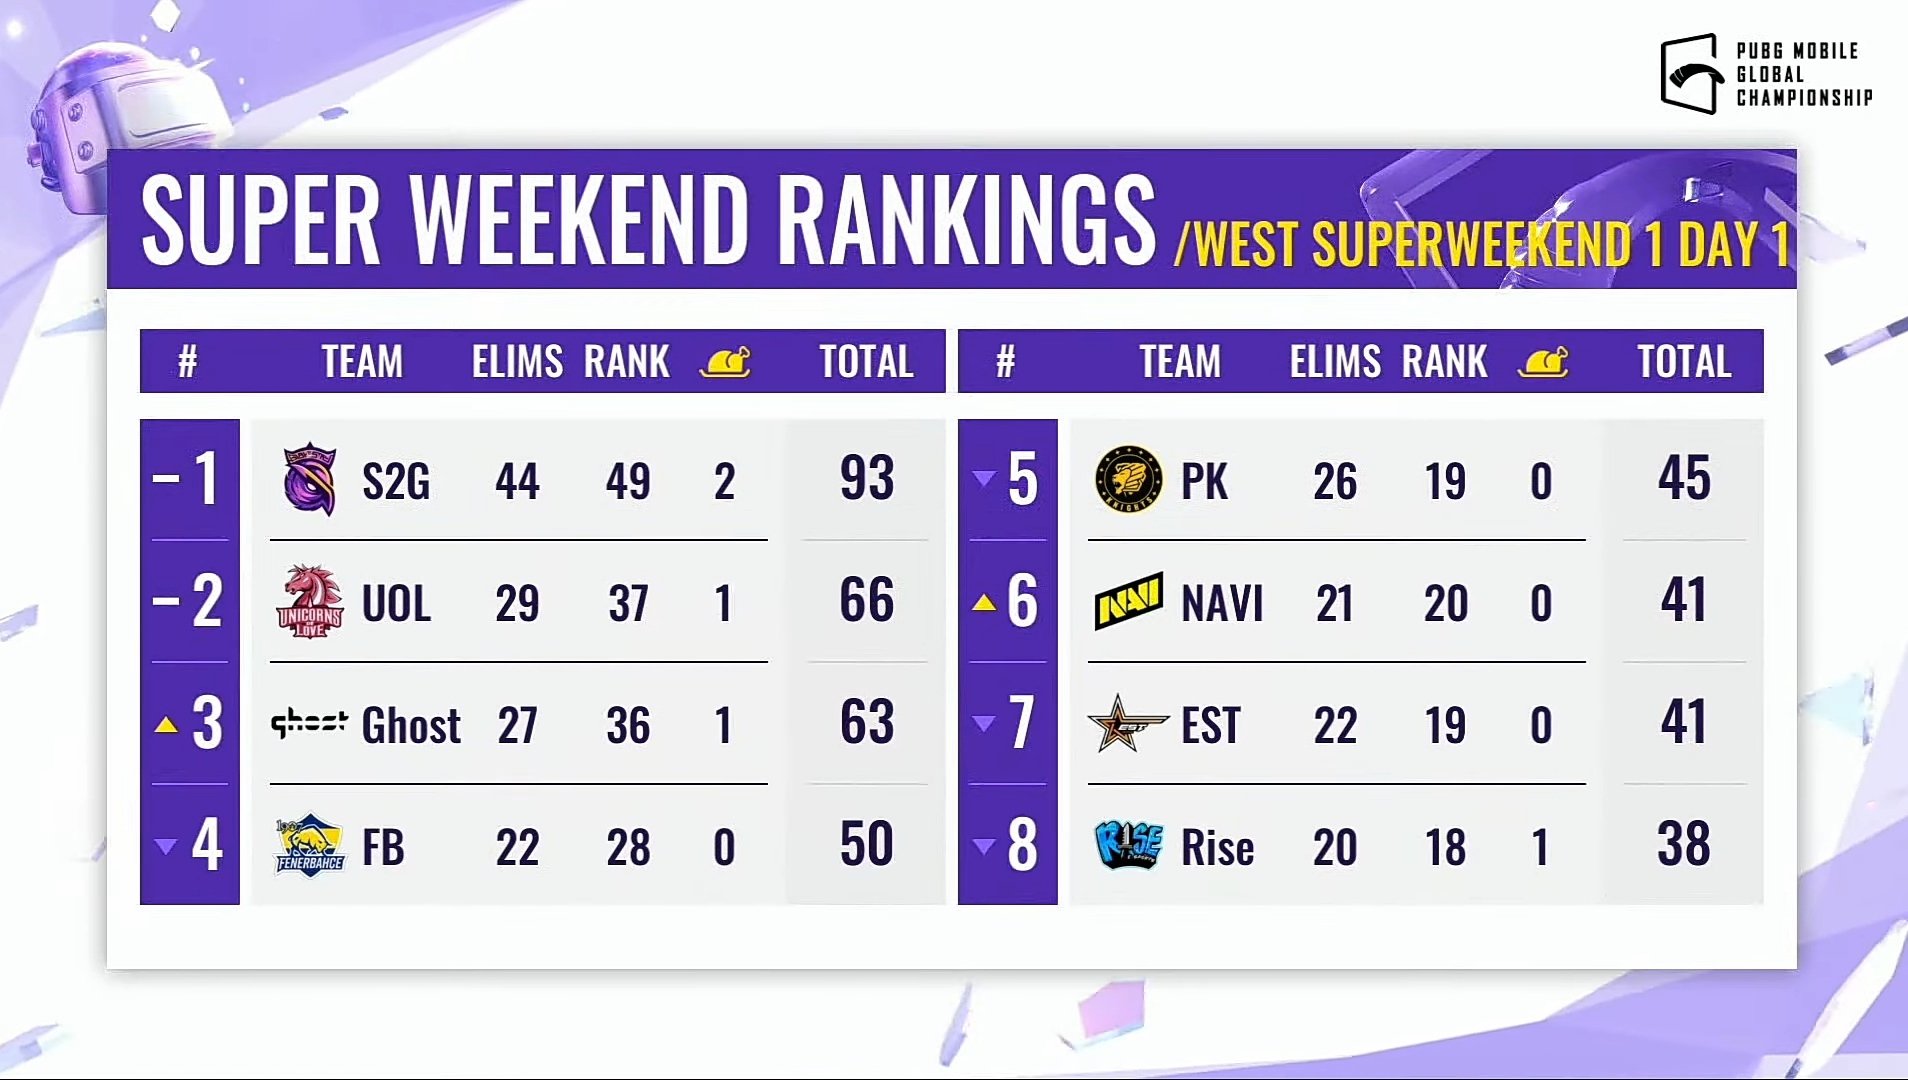 PMGC 2021 West Super Weekend 1 Day 1 overall standings